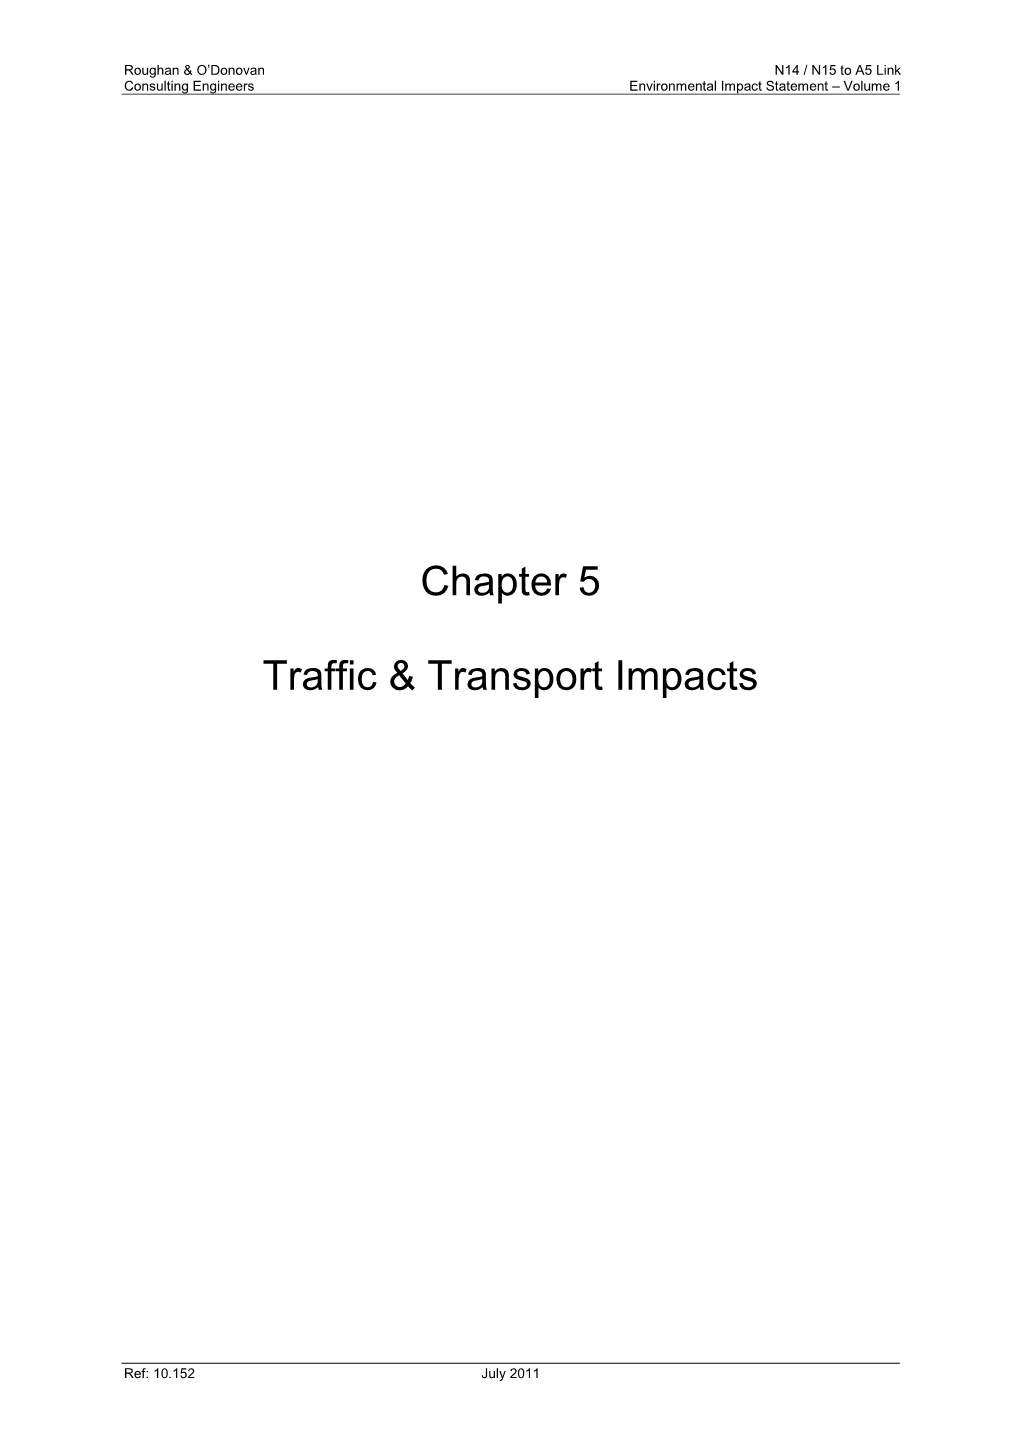 Chapter 5 Traffic & Transport Impacts